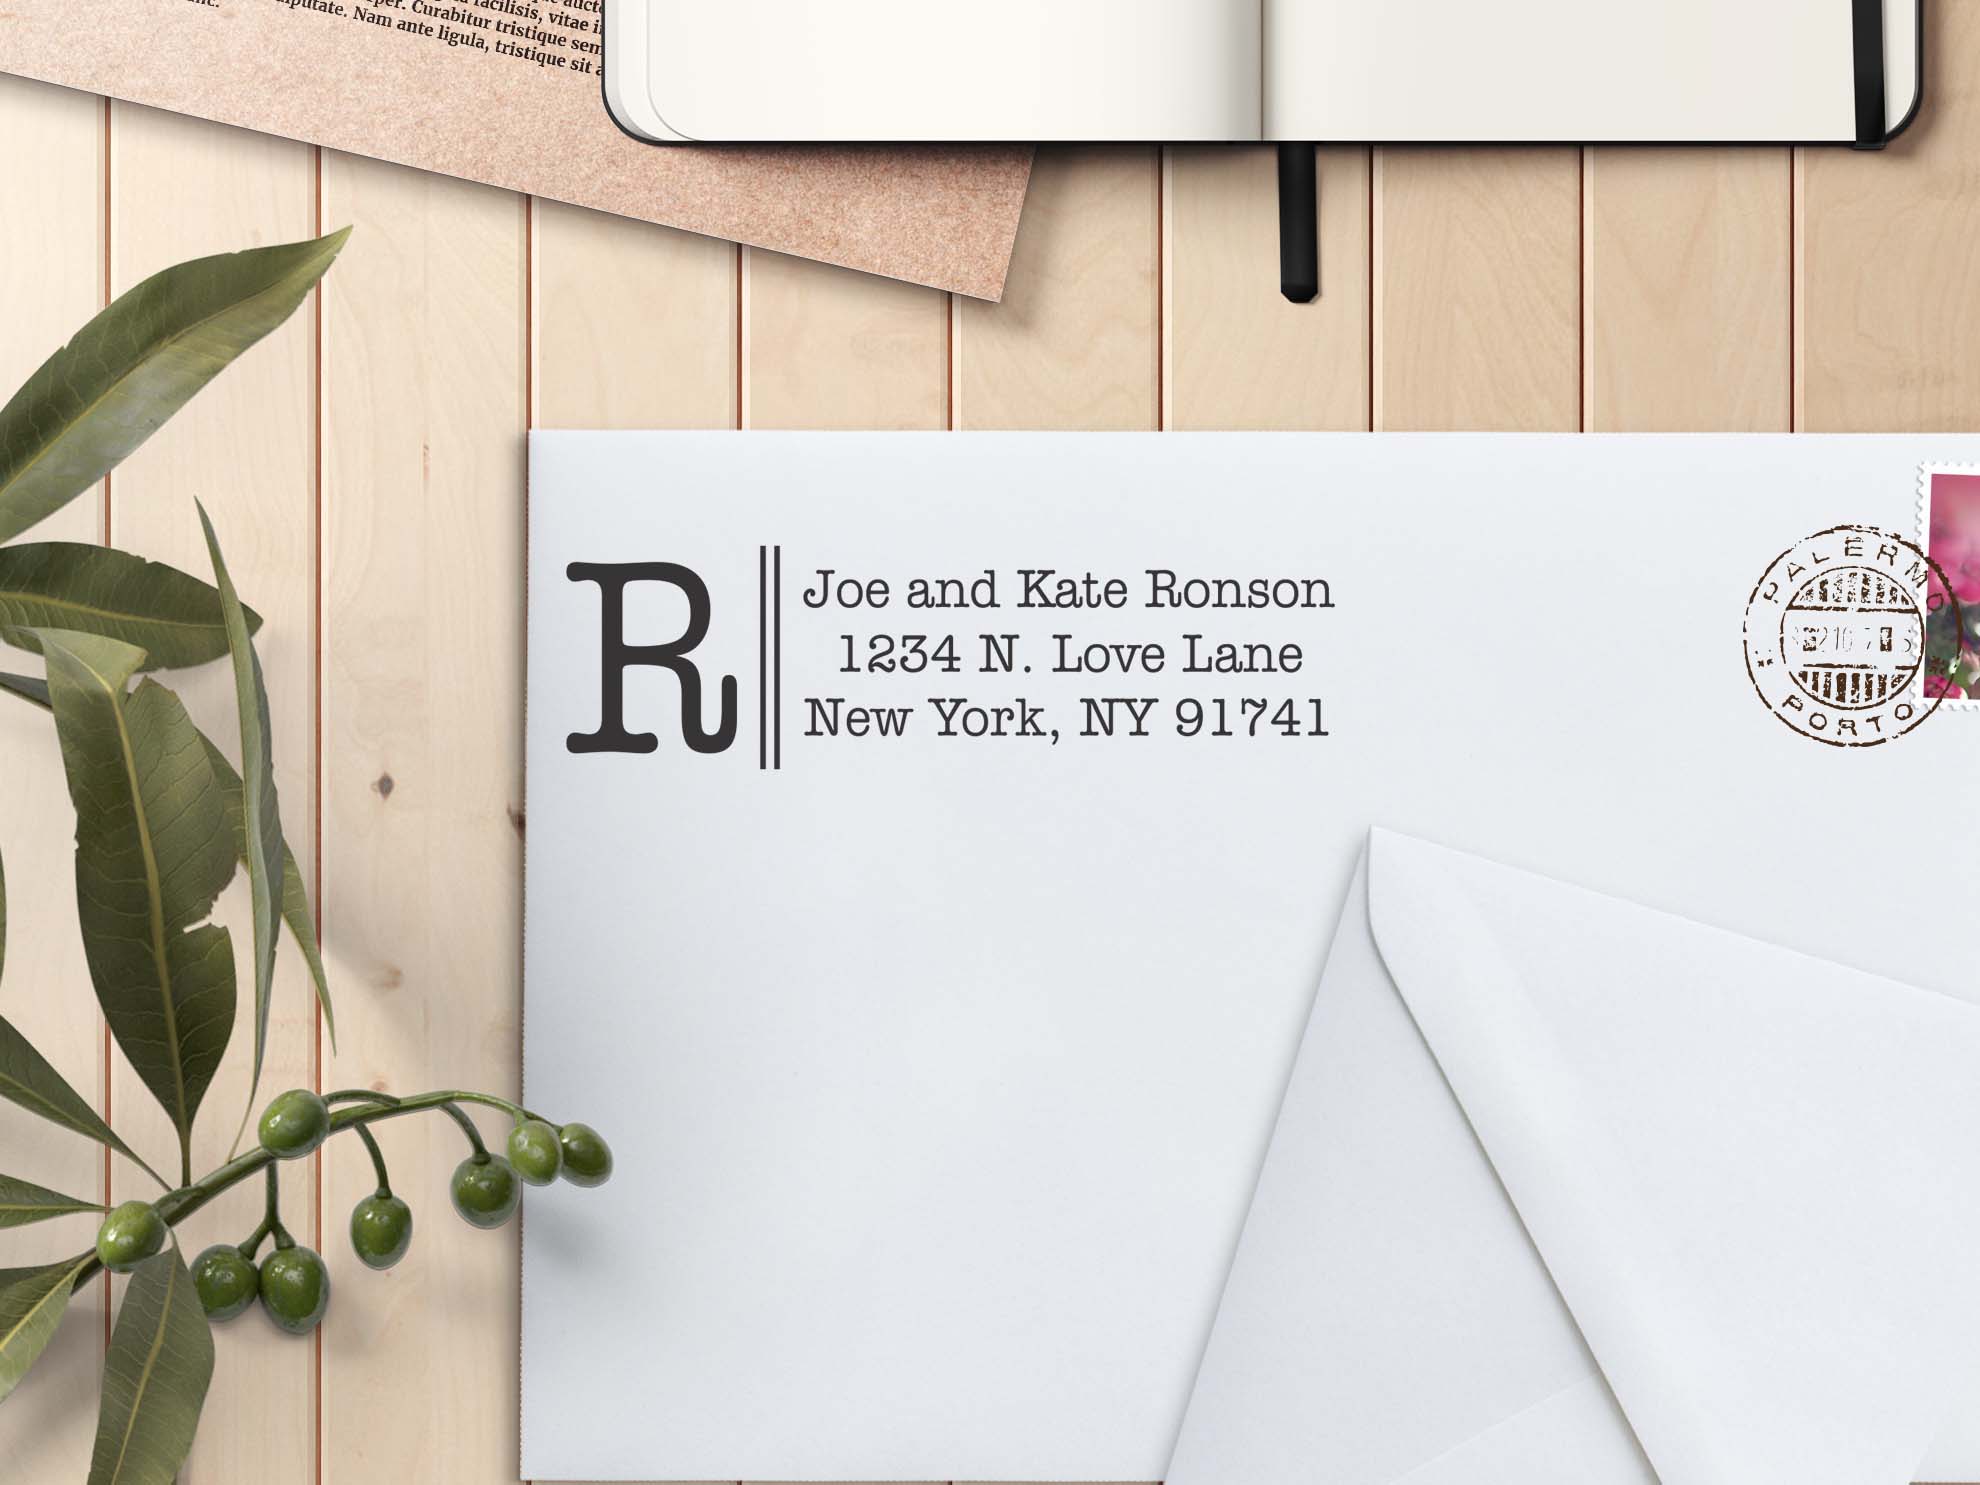 Custom Self Inking Stamp, Personalized Address Stamp - Up to 2